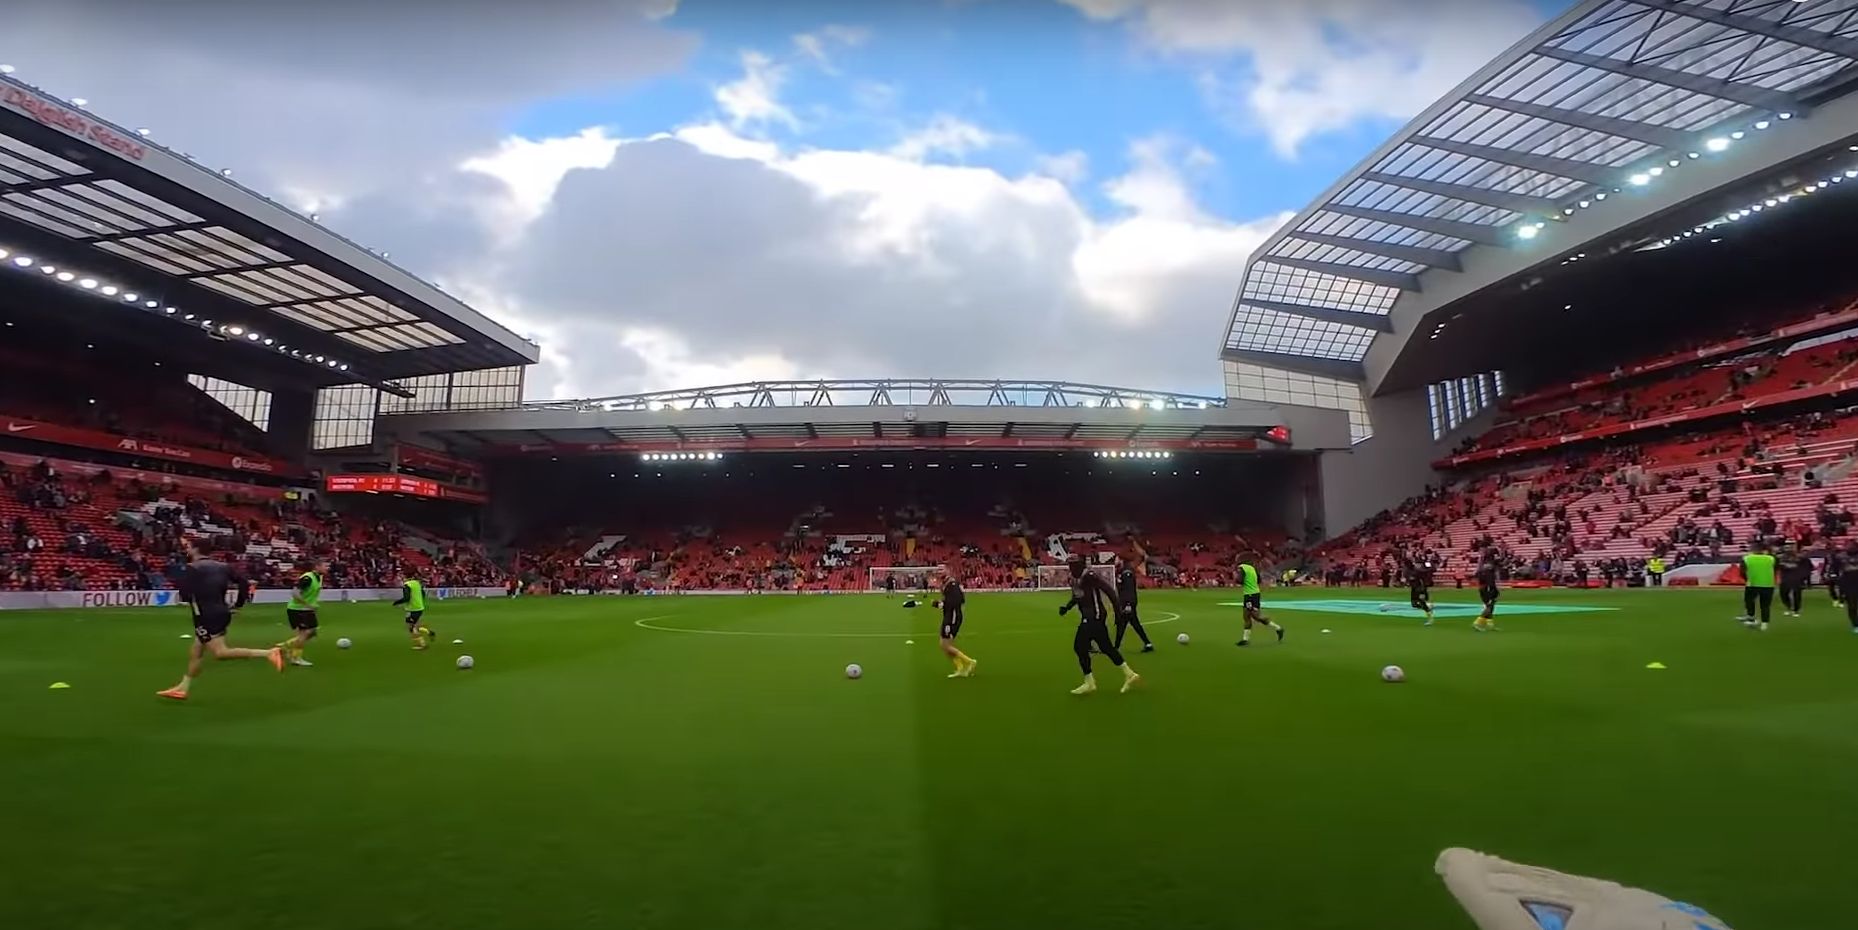 (Video) Ben Foster shares behind the scenes access to Anfield during recent Premier League visit with Watford